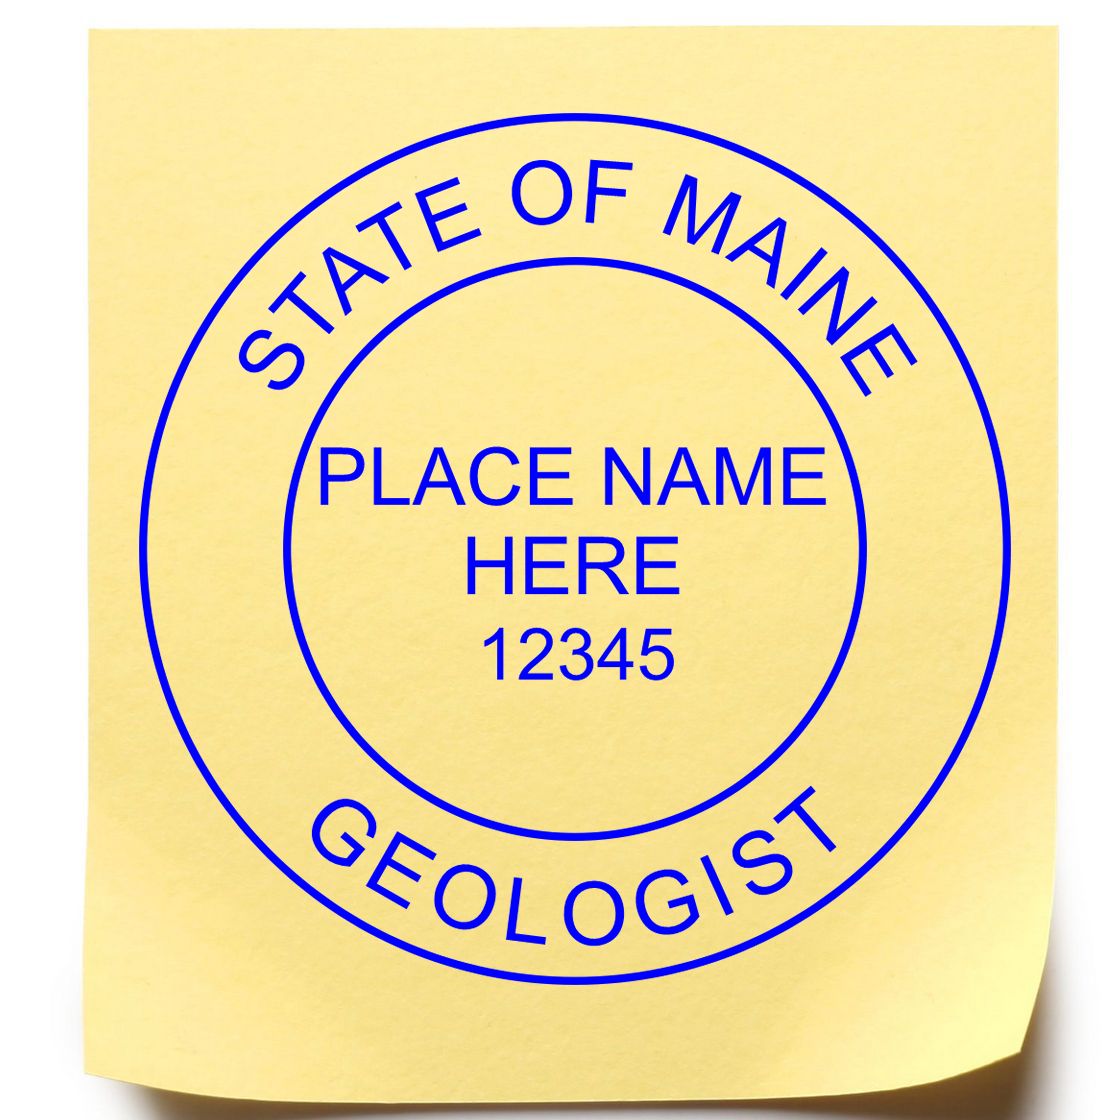 The main image for the Digital Maine Geologist Stamp, Electronic Seal for Maine Geologist depicting a sample of the imprint and imprint sample